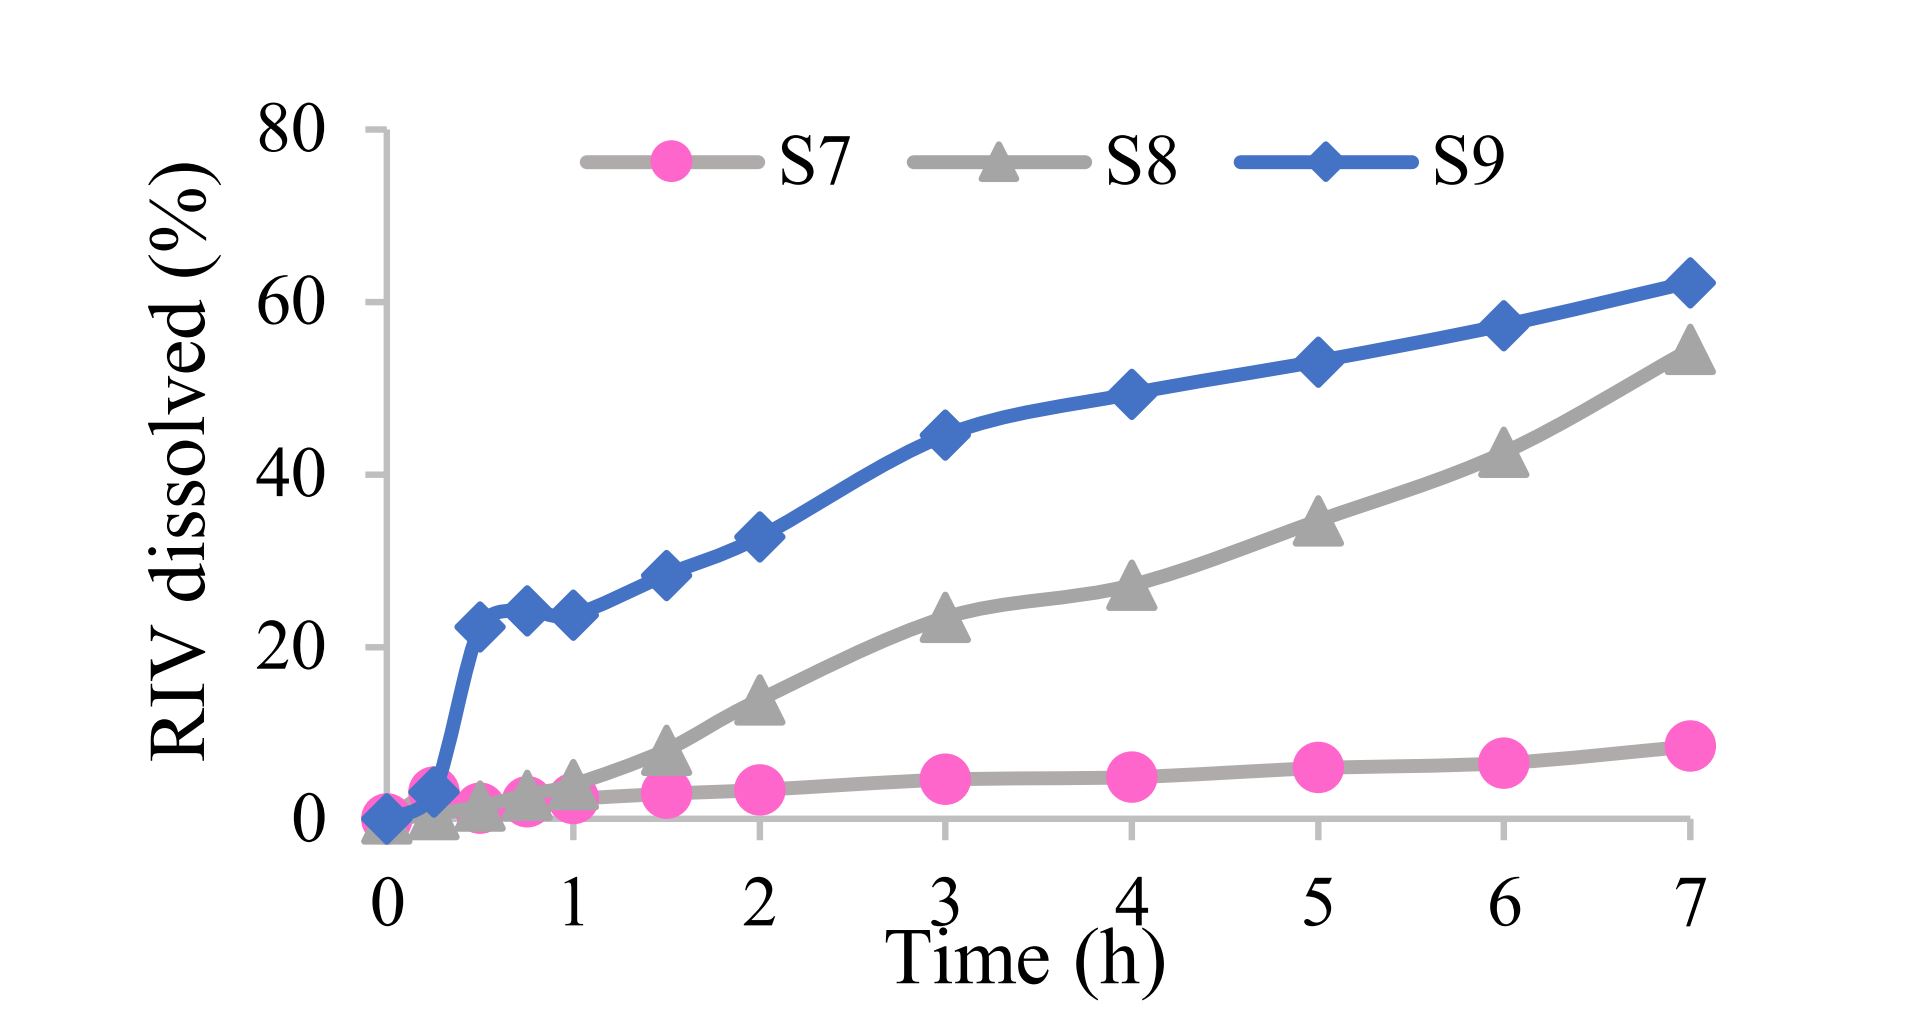 Fig. 2. Dissolution profile of RIV obtained from modified release compacts